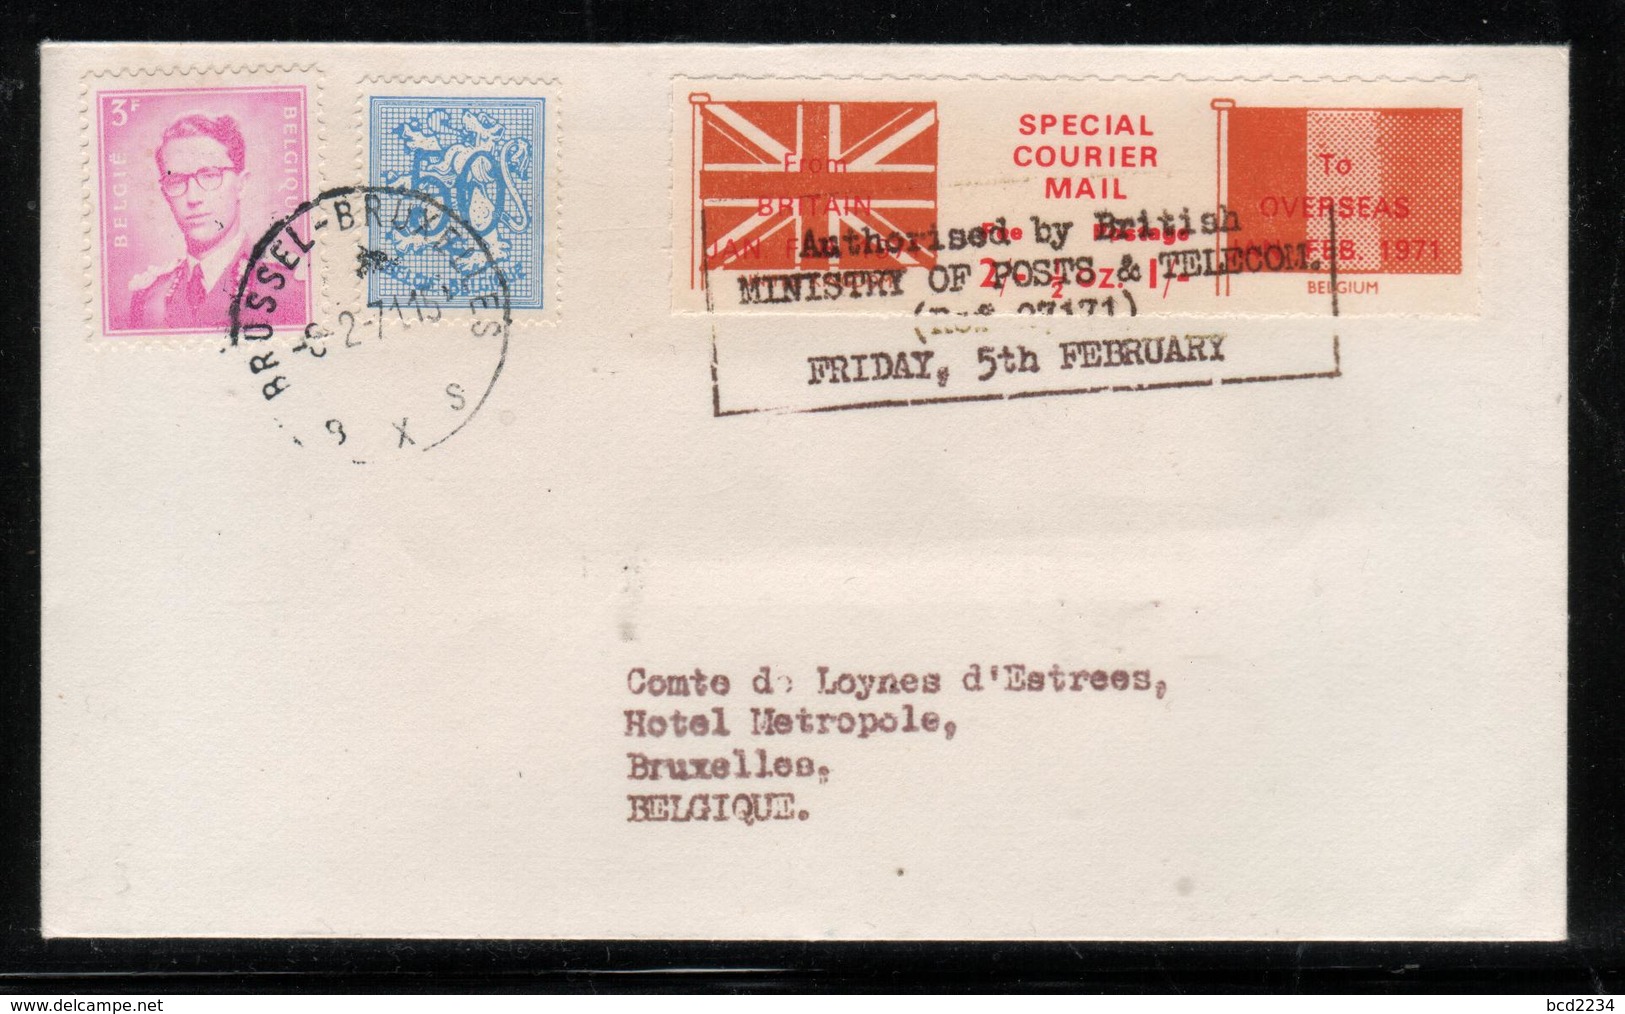 GREAT BRITAIN GB 1971 POSTAL STRIKE MAIL SPECIAL COURIER MAIL 1ST ISSUE PRE-DECIMAL COVER TO BRUSSELS BELGIUM 5 FEBRUARY - Cinderellas